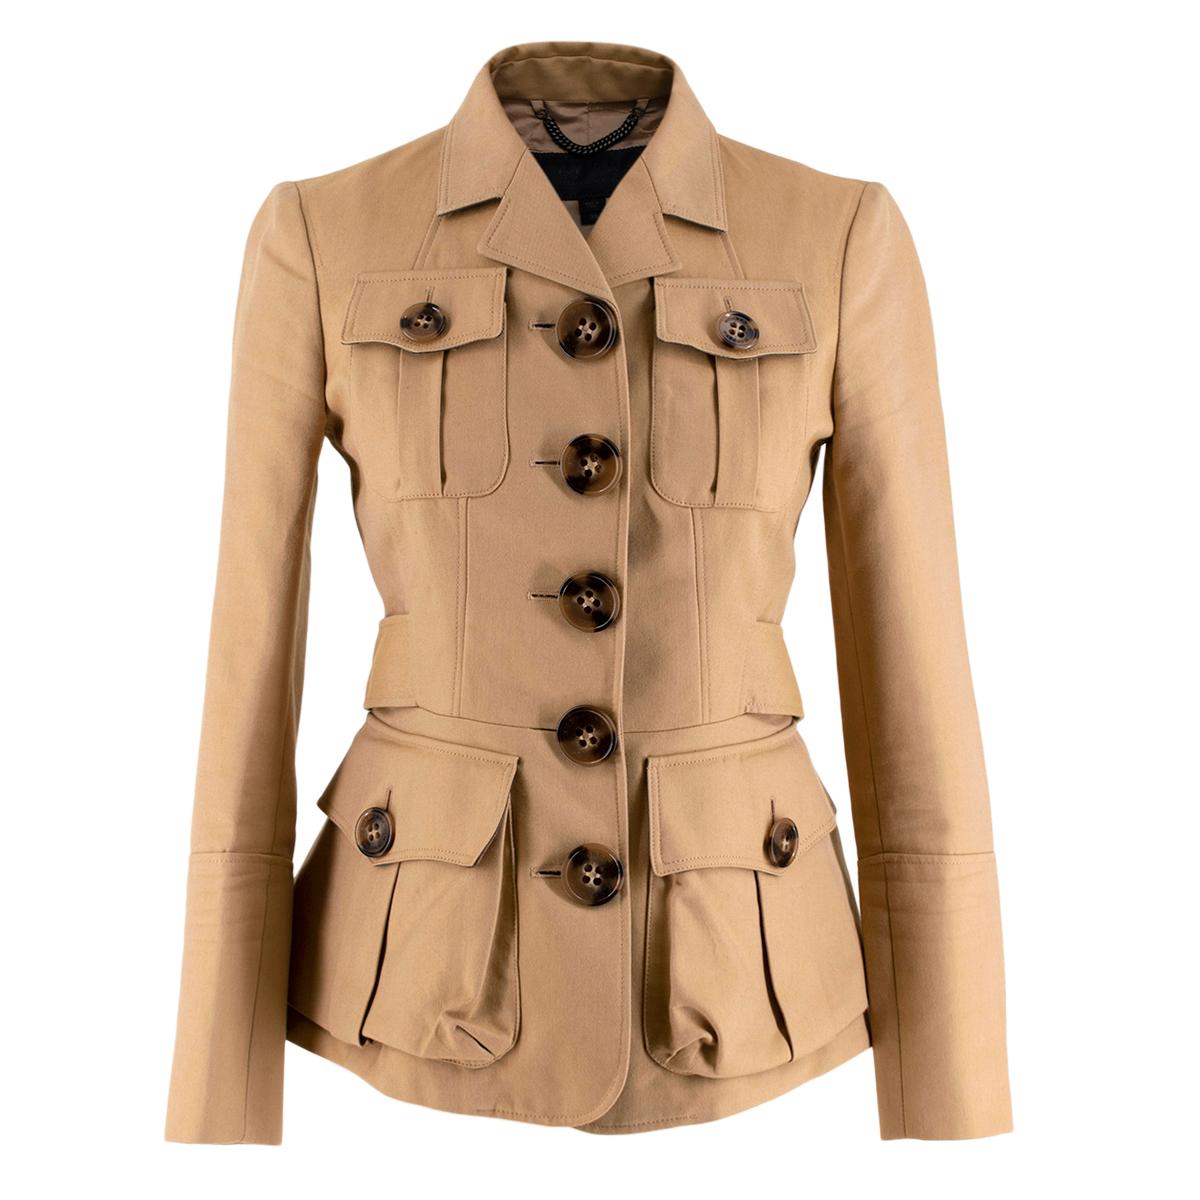 Burberry Prorsum Beige Tailored Safari Jacket

- Tailored silhouette
- Four pockets at the front finished with  Burberry button
- Pleat details to the waist
- Buttoned cuffs
- Timeless elegant design

Materials:
Outer
89% Cotton
11% Viscose

Leather